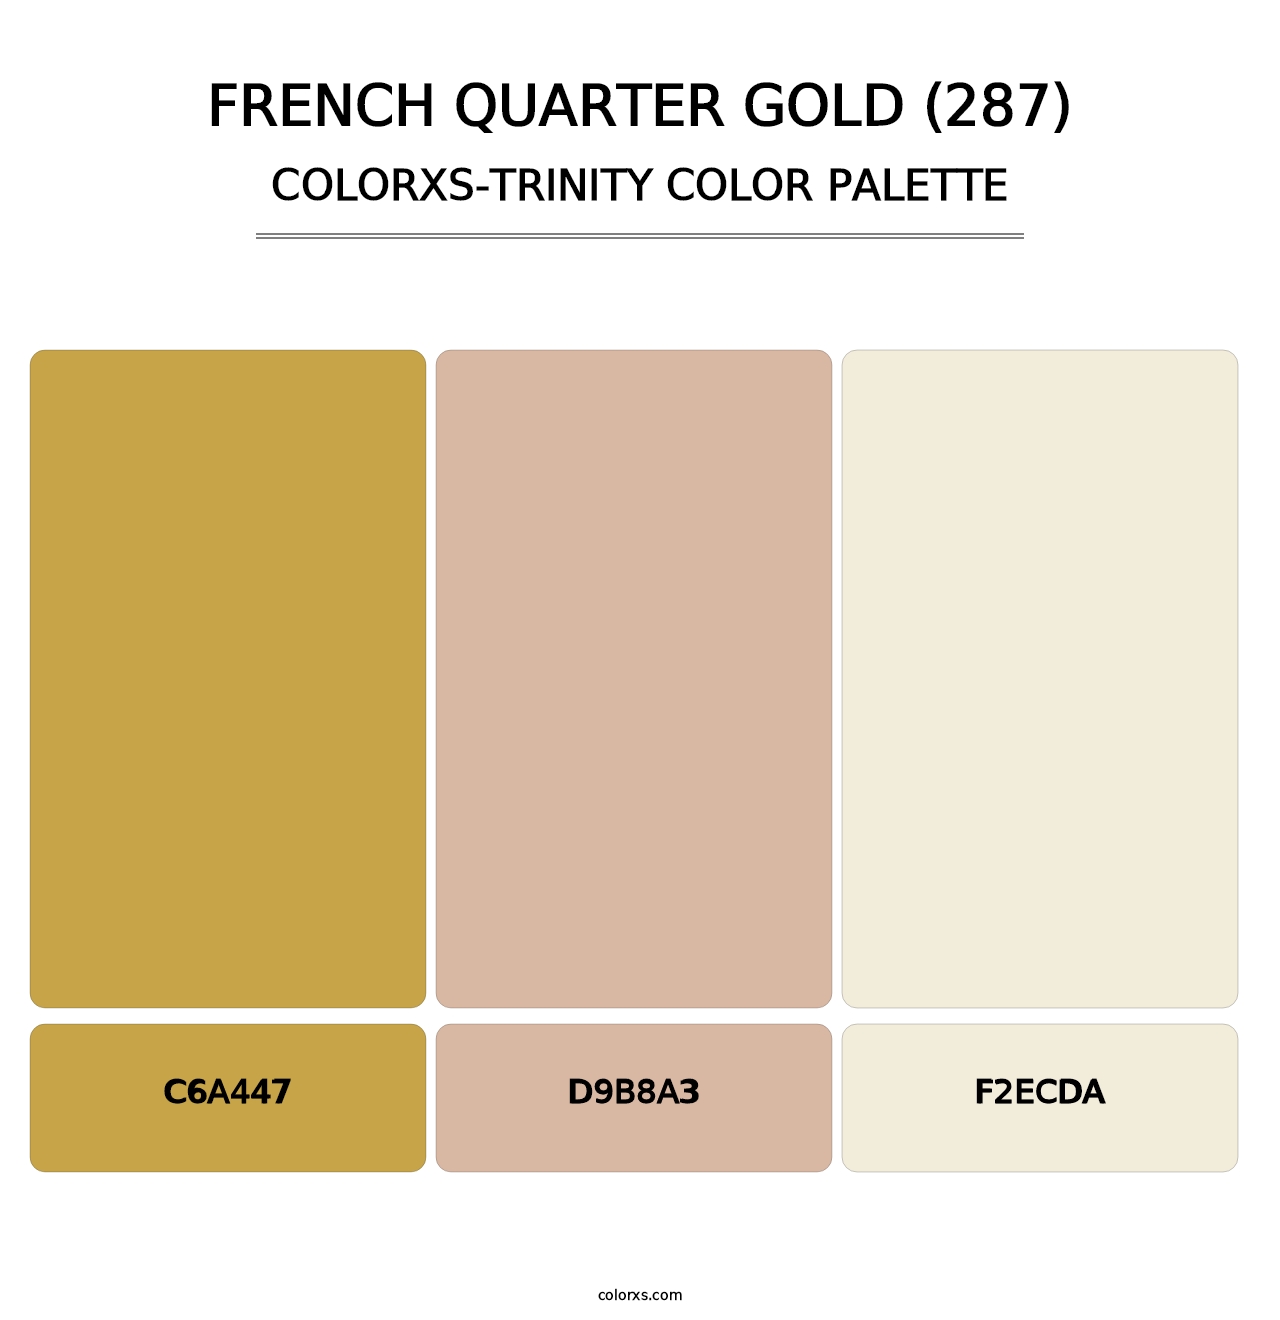 French Quarter Gold (287) - Colorxs Trinity Palette